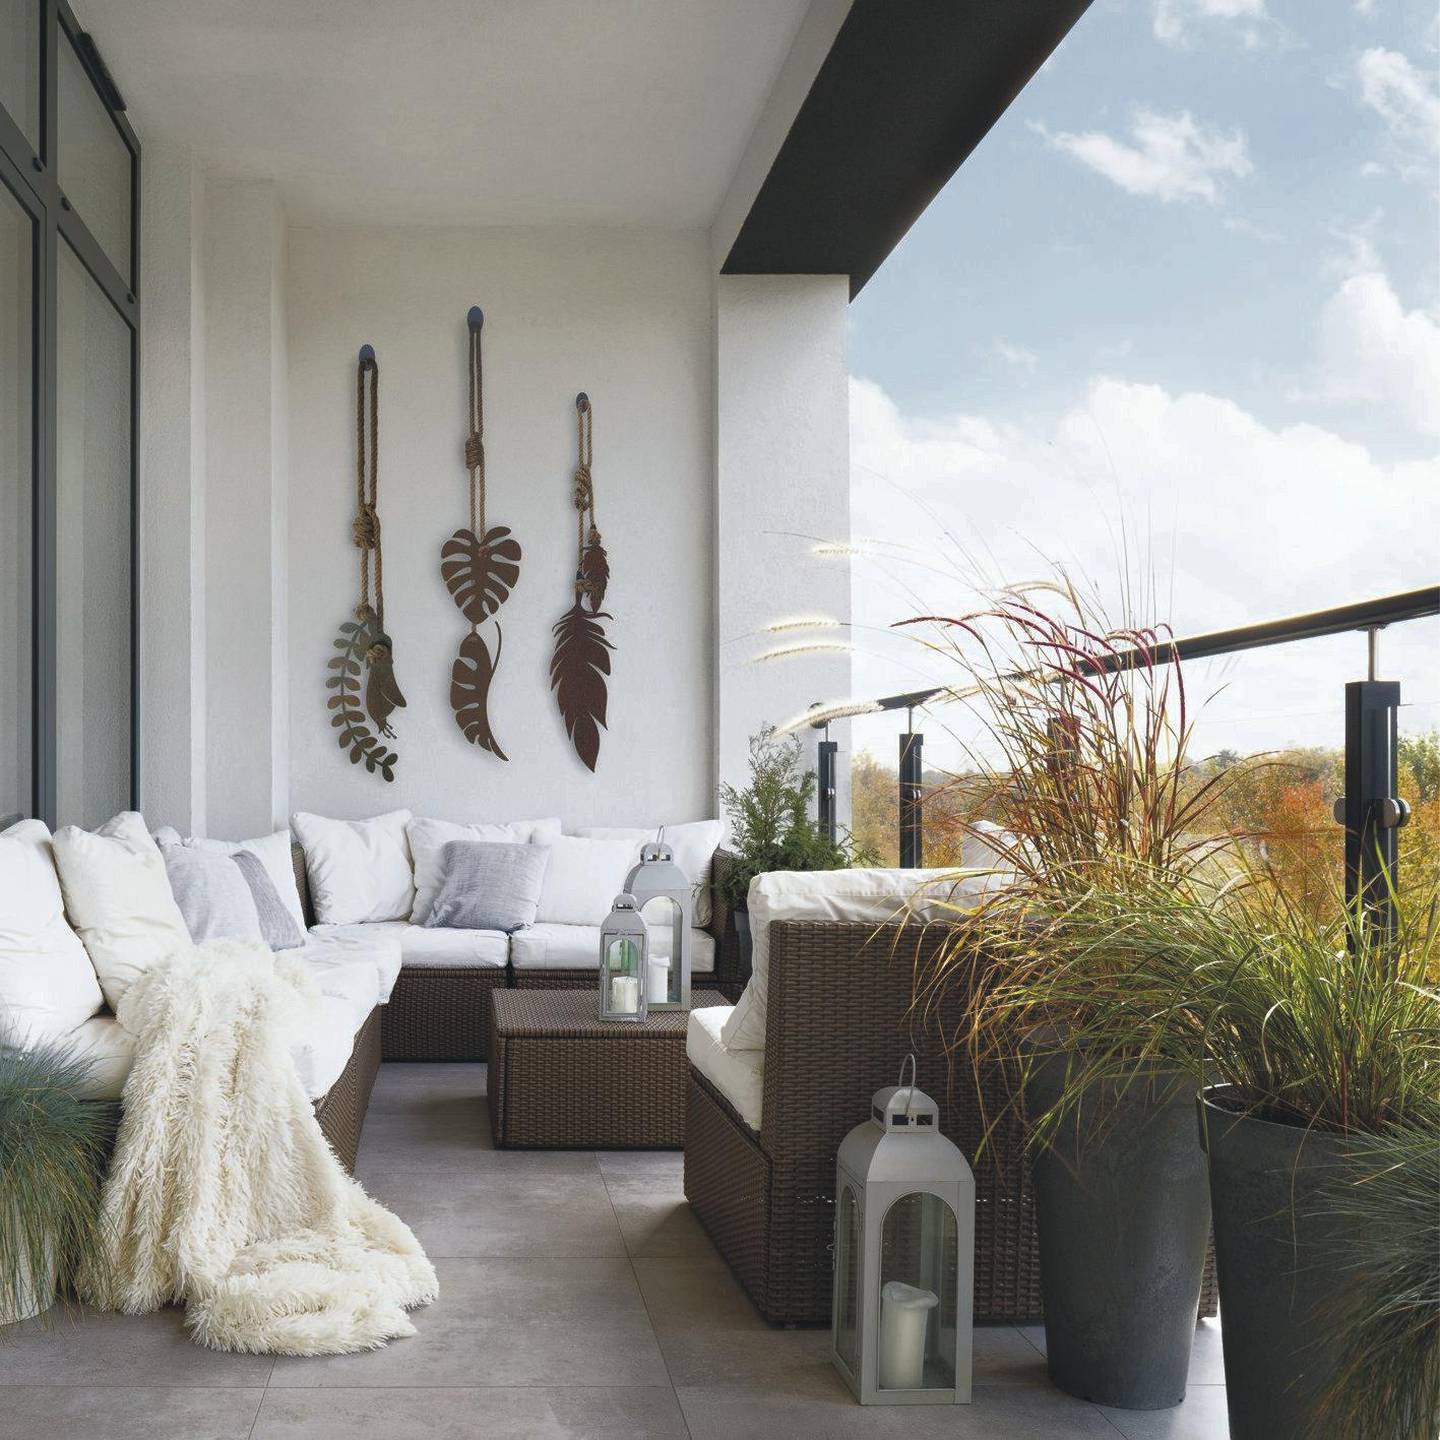 Make your outdoor space as inviting as possible. LisaSarah